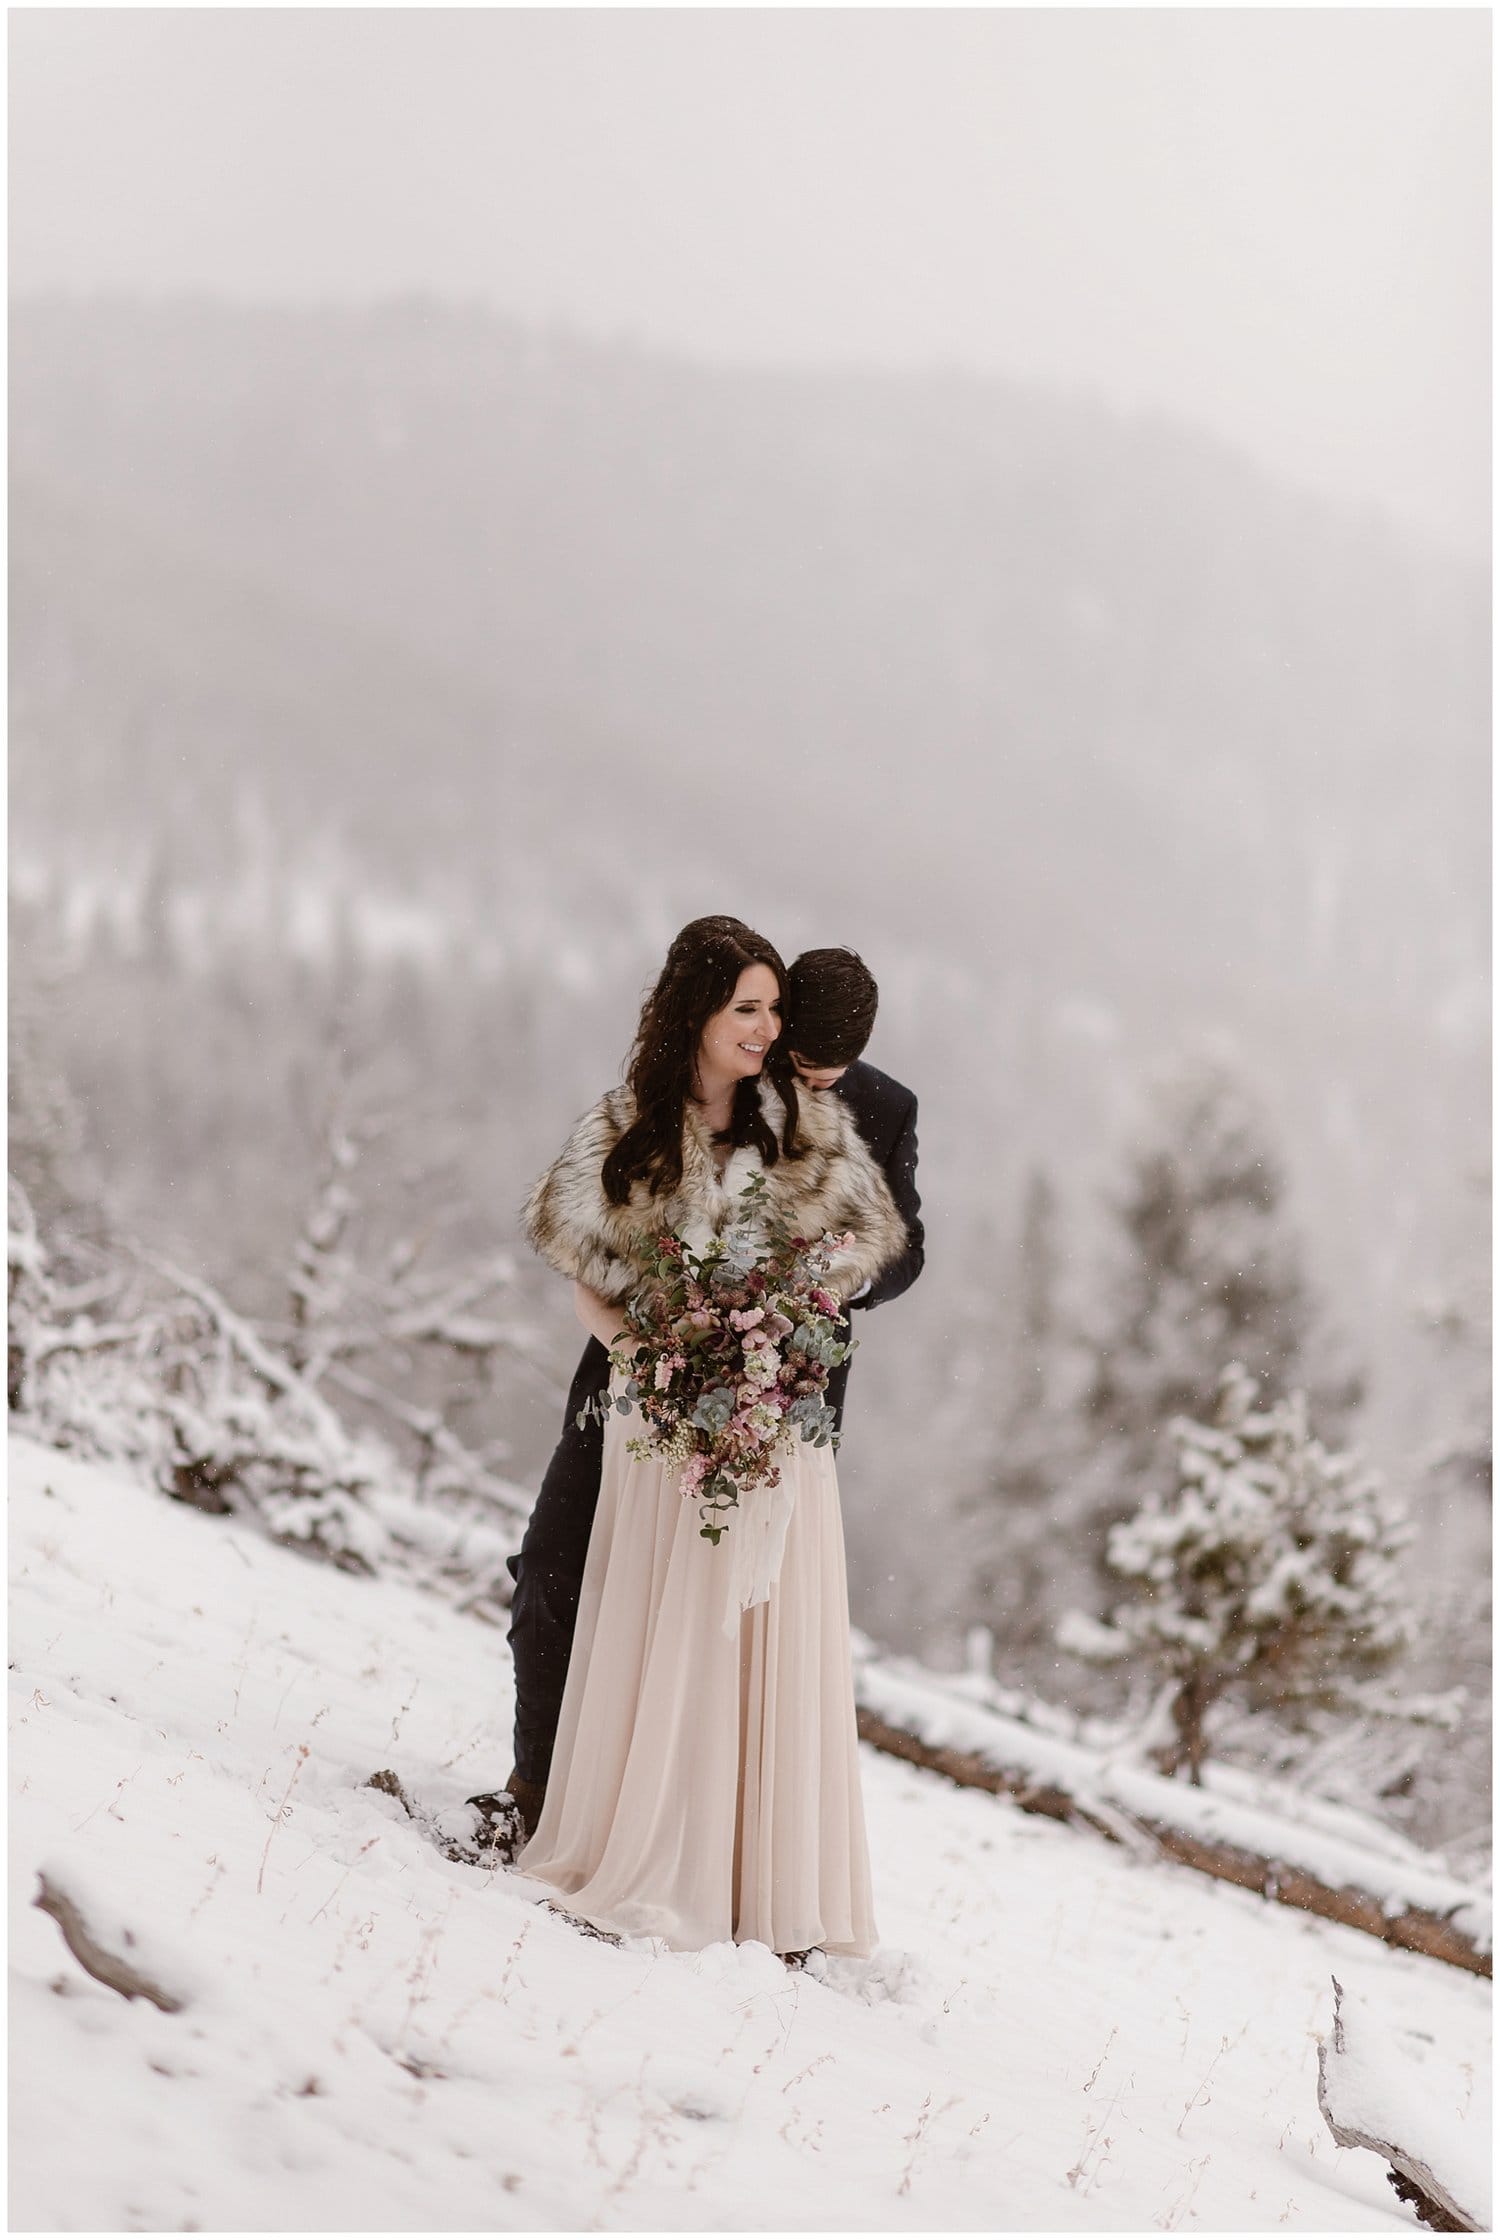 Bride and groom embrace during snow storm on their elopement day. 